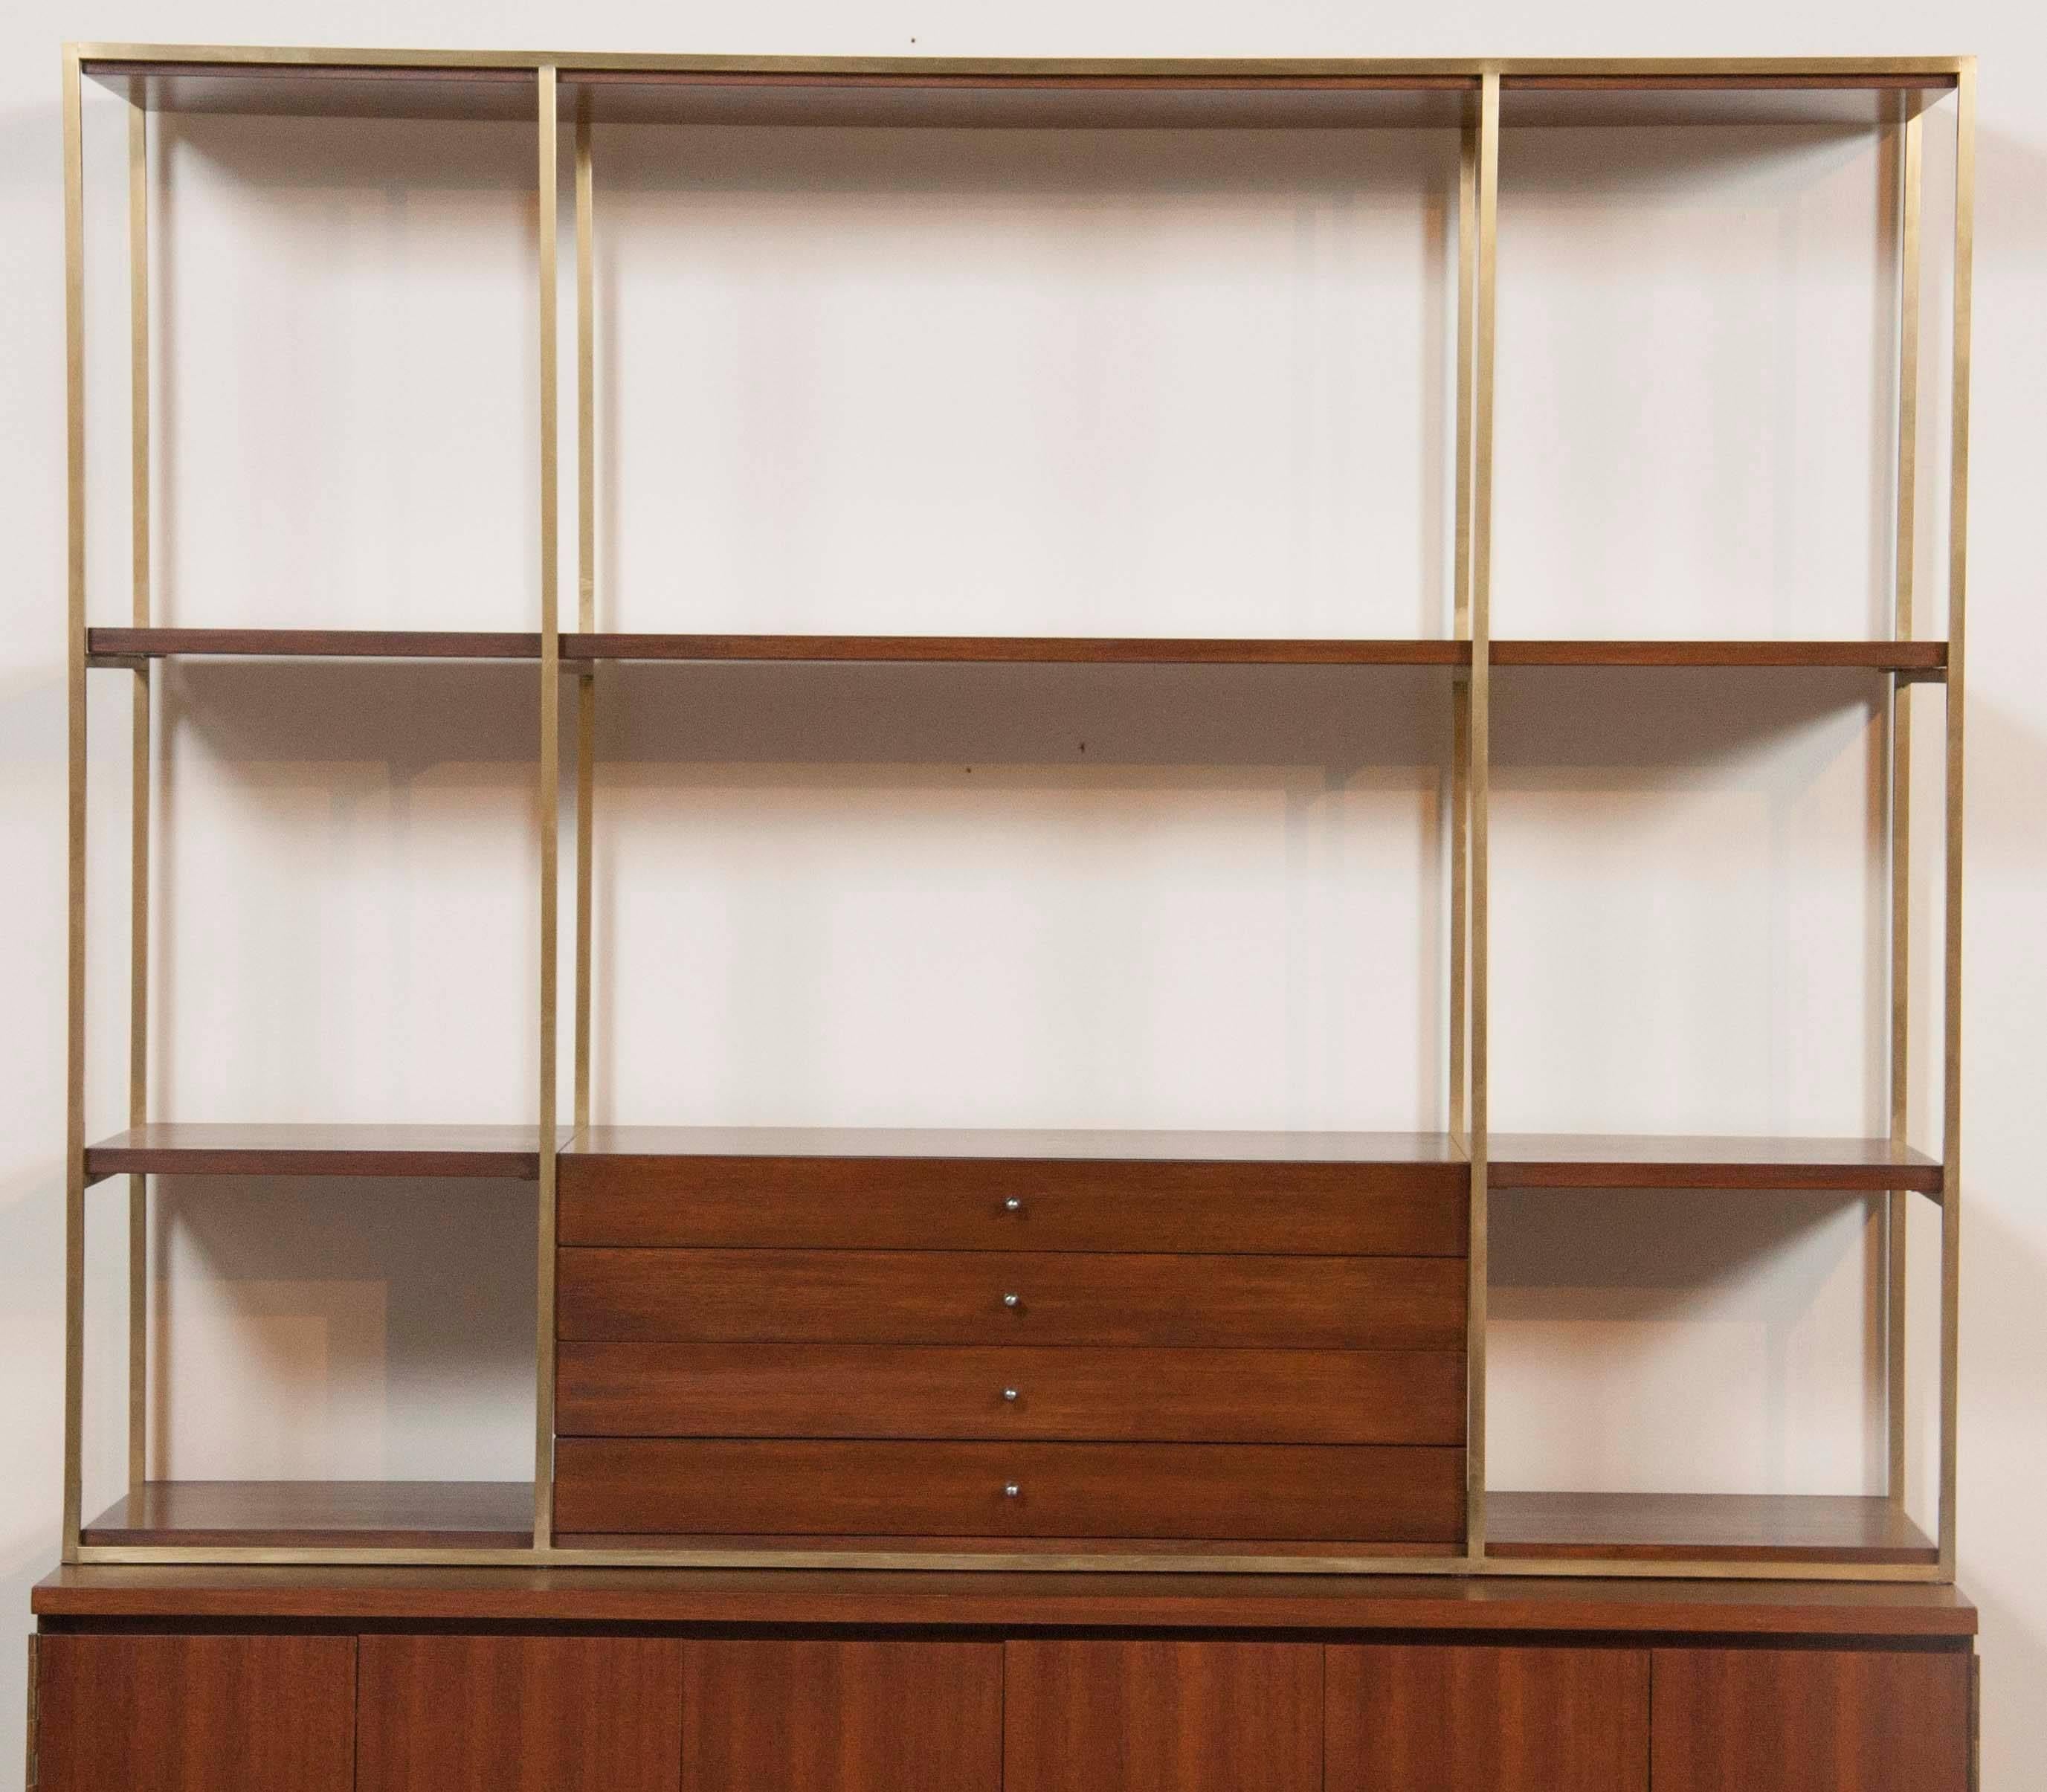 A Walnut and brass credenza with bookcase by Paul McCobb for Calvin, in excellent condition.